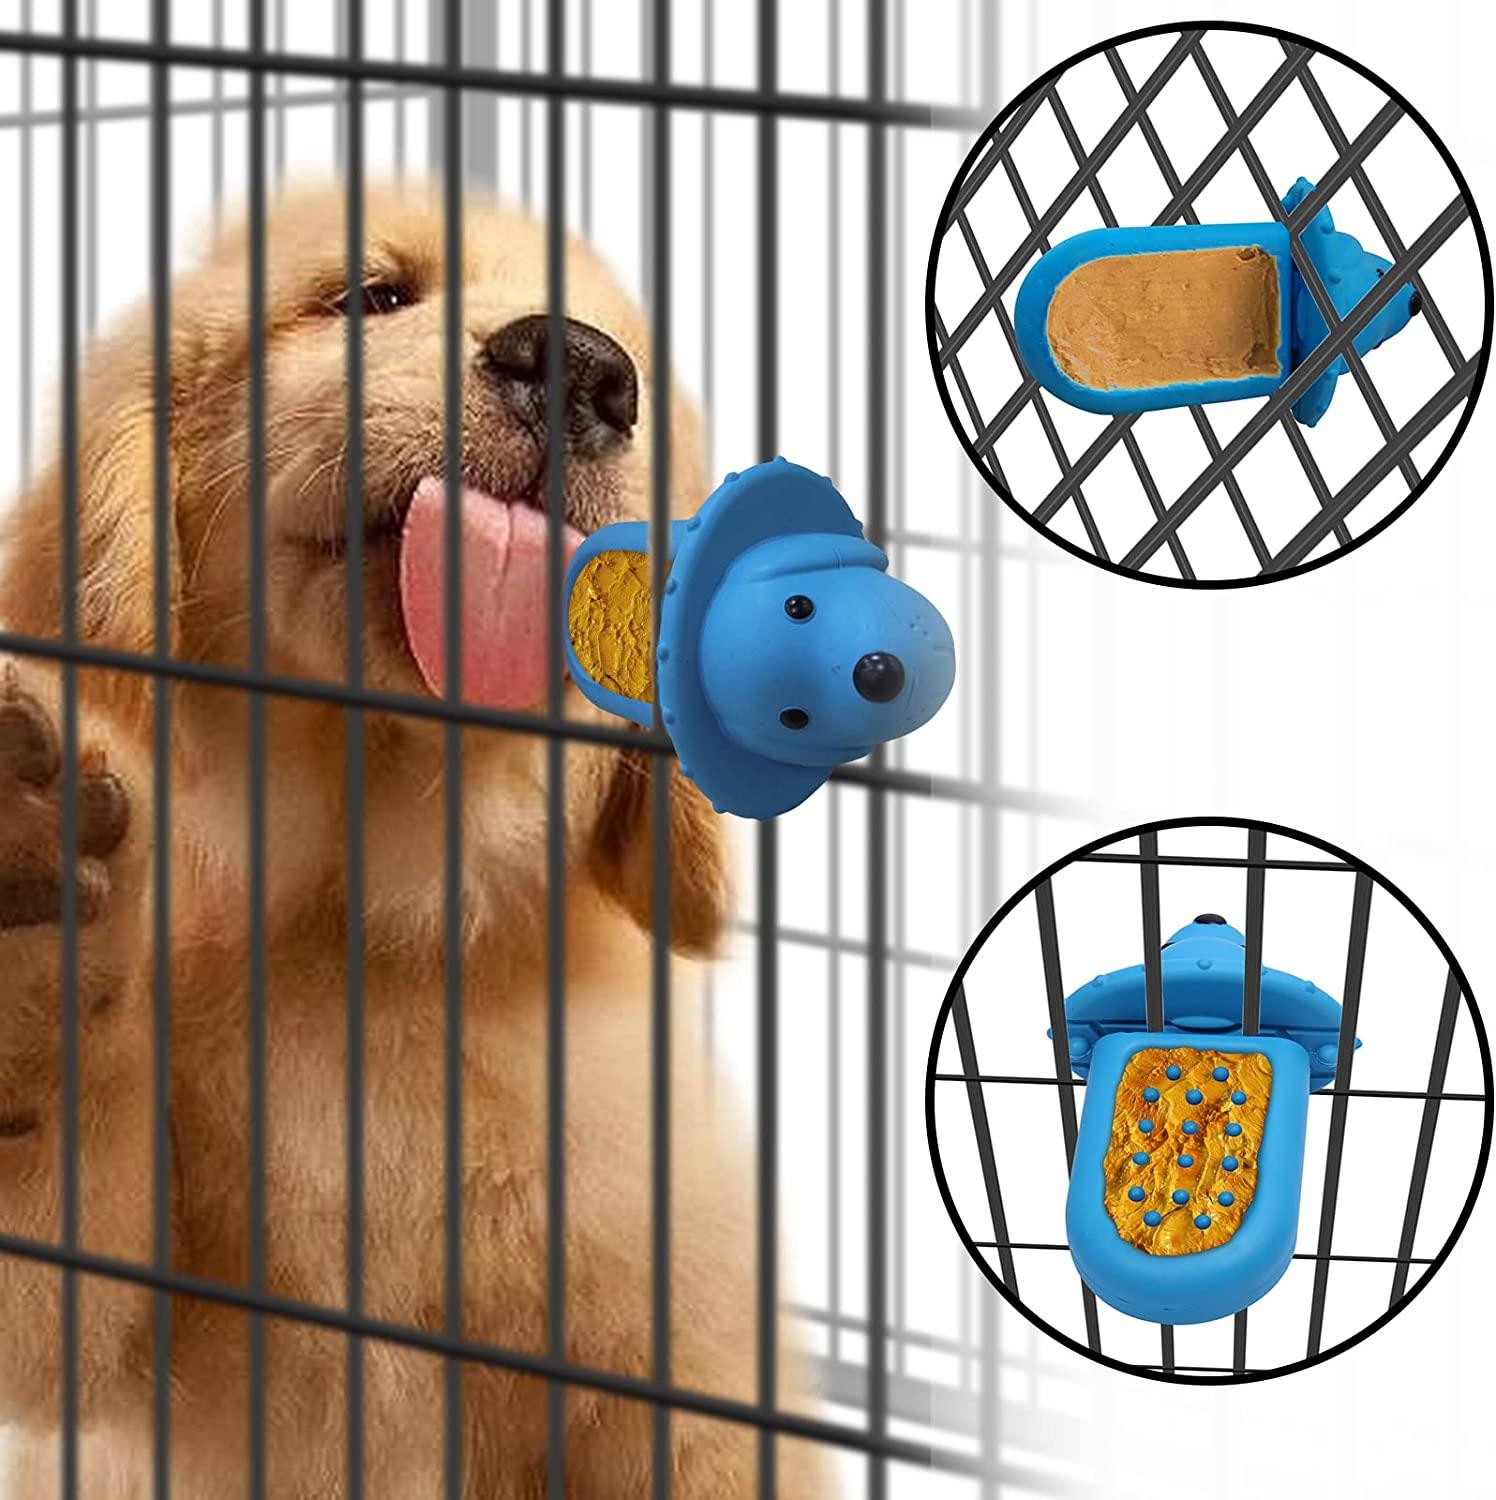 ChengFu Interactive Dog Toys, Crate Training Aids for Puppies, Reduce  Stress Anxiety Peanut Butter Dog Food Treat Dispenser Toys